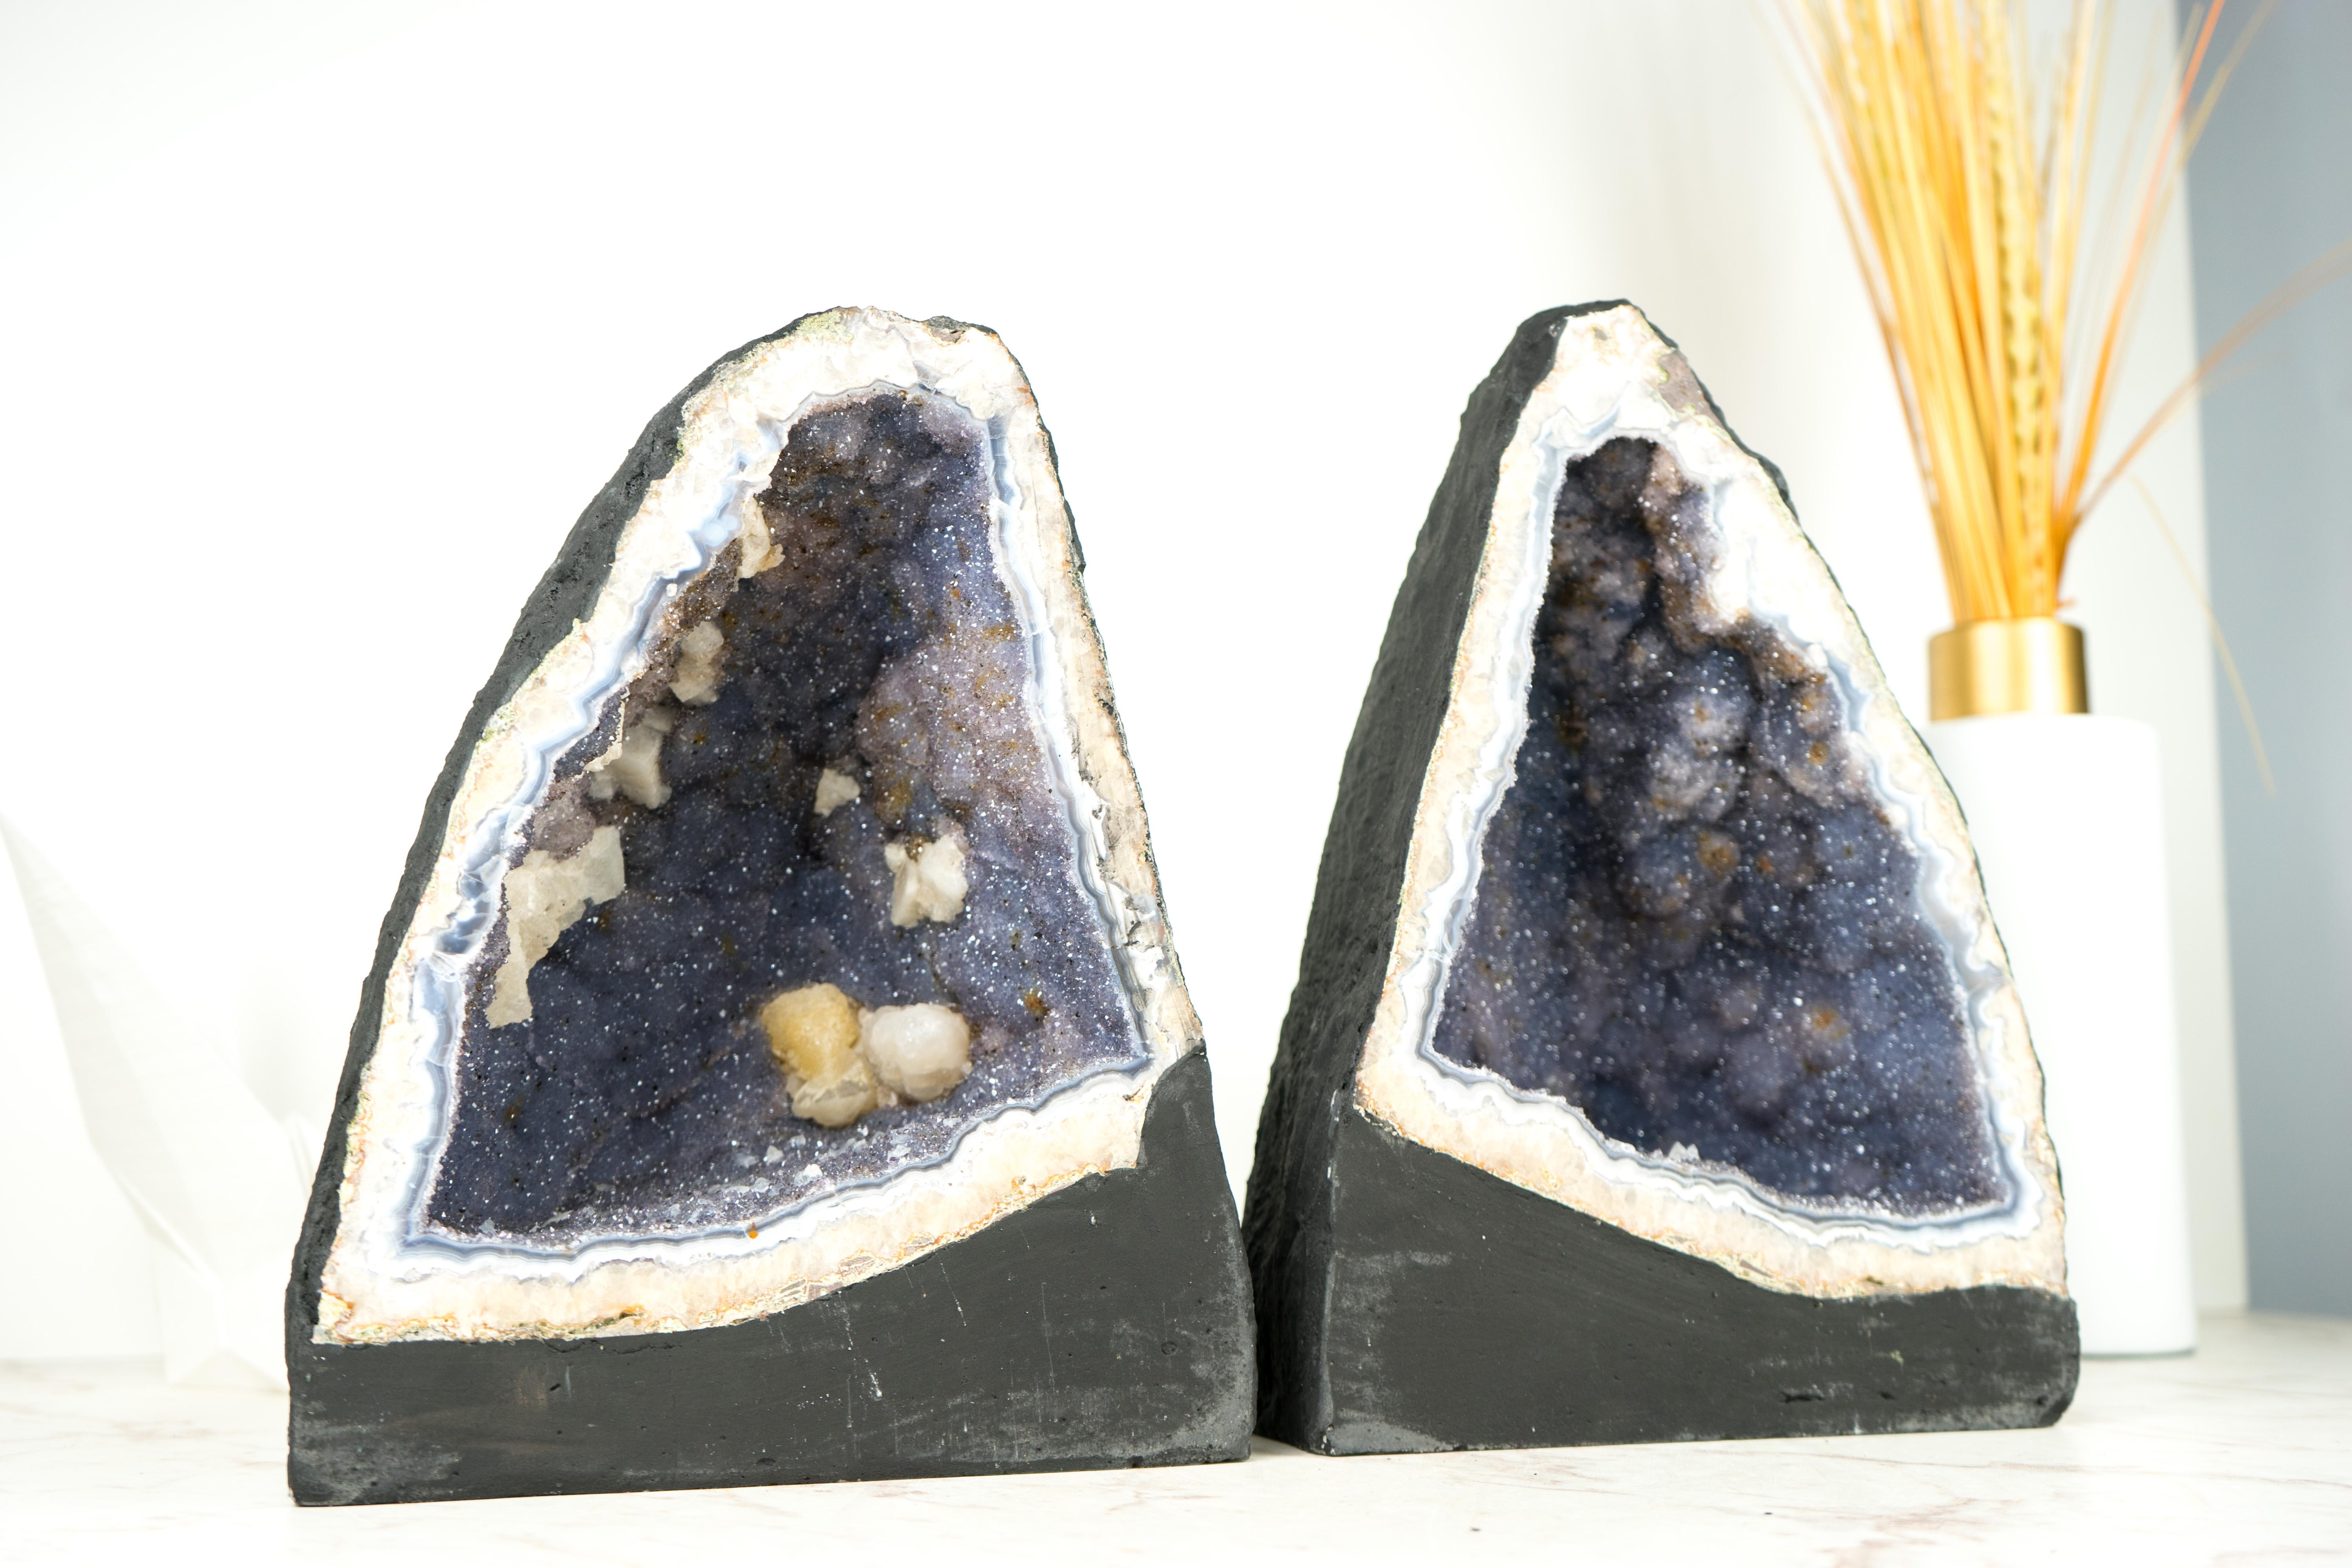 Pair of Blue Lace Agate Geodes with Lavender Amethyst Druzy, Rare Sparkly Geodes For Sale 2